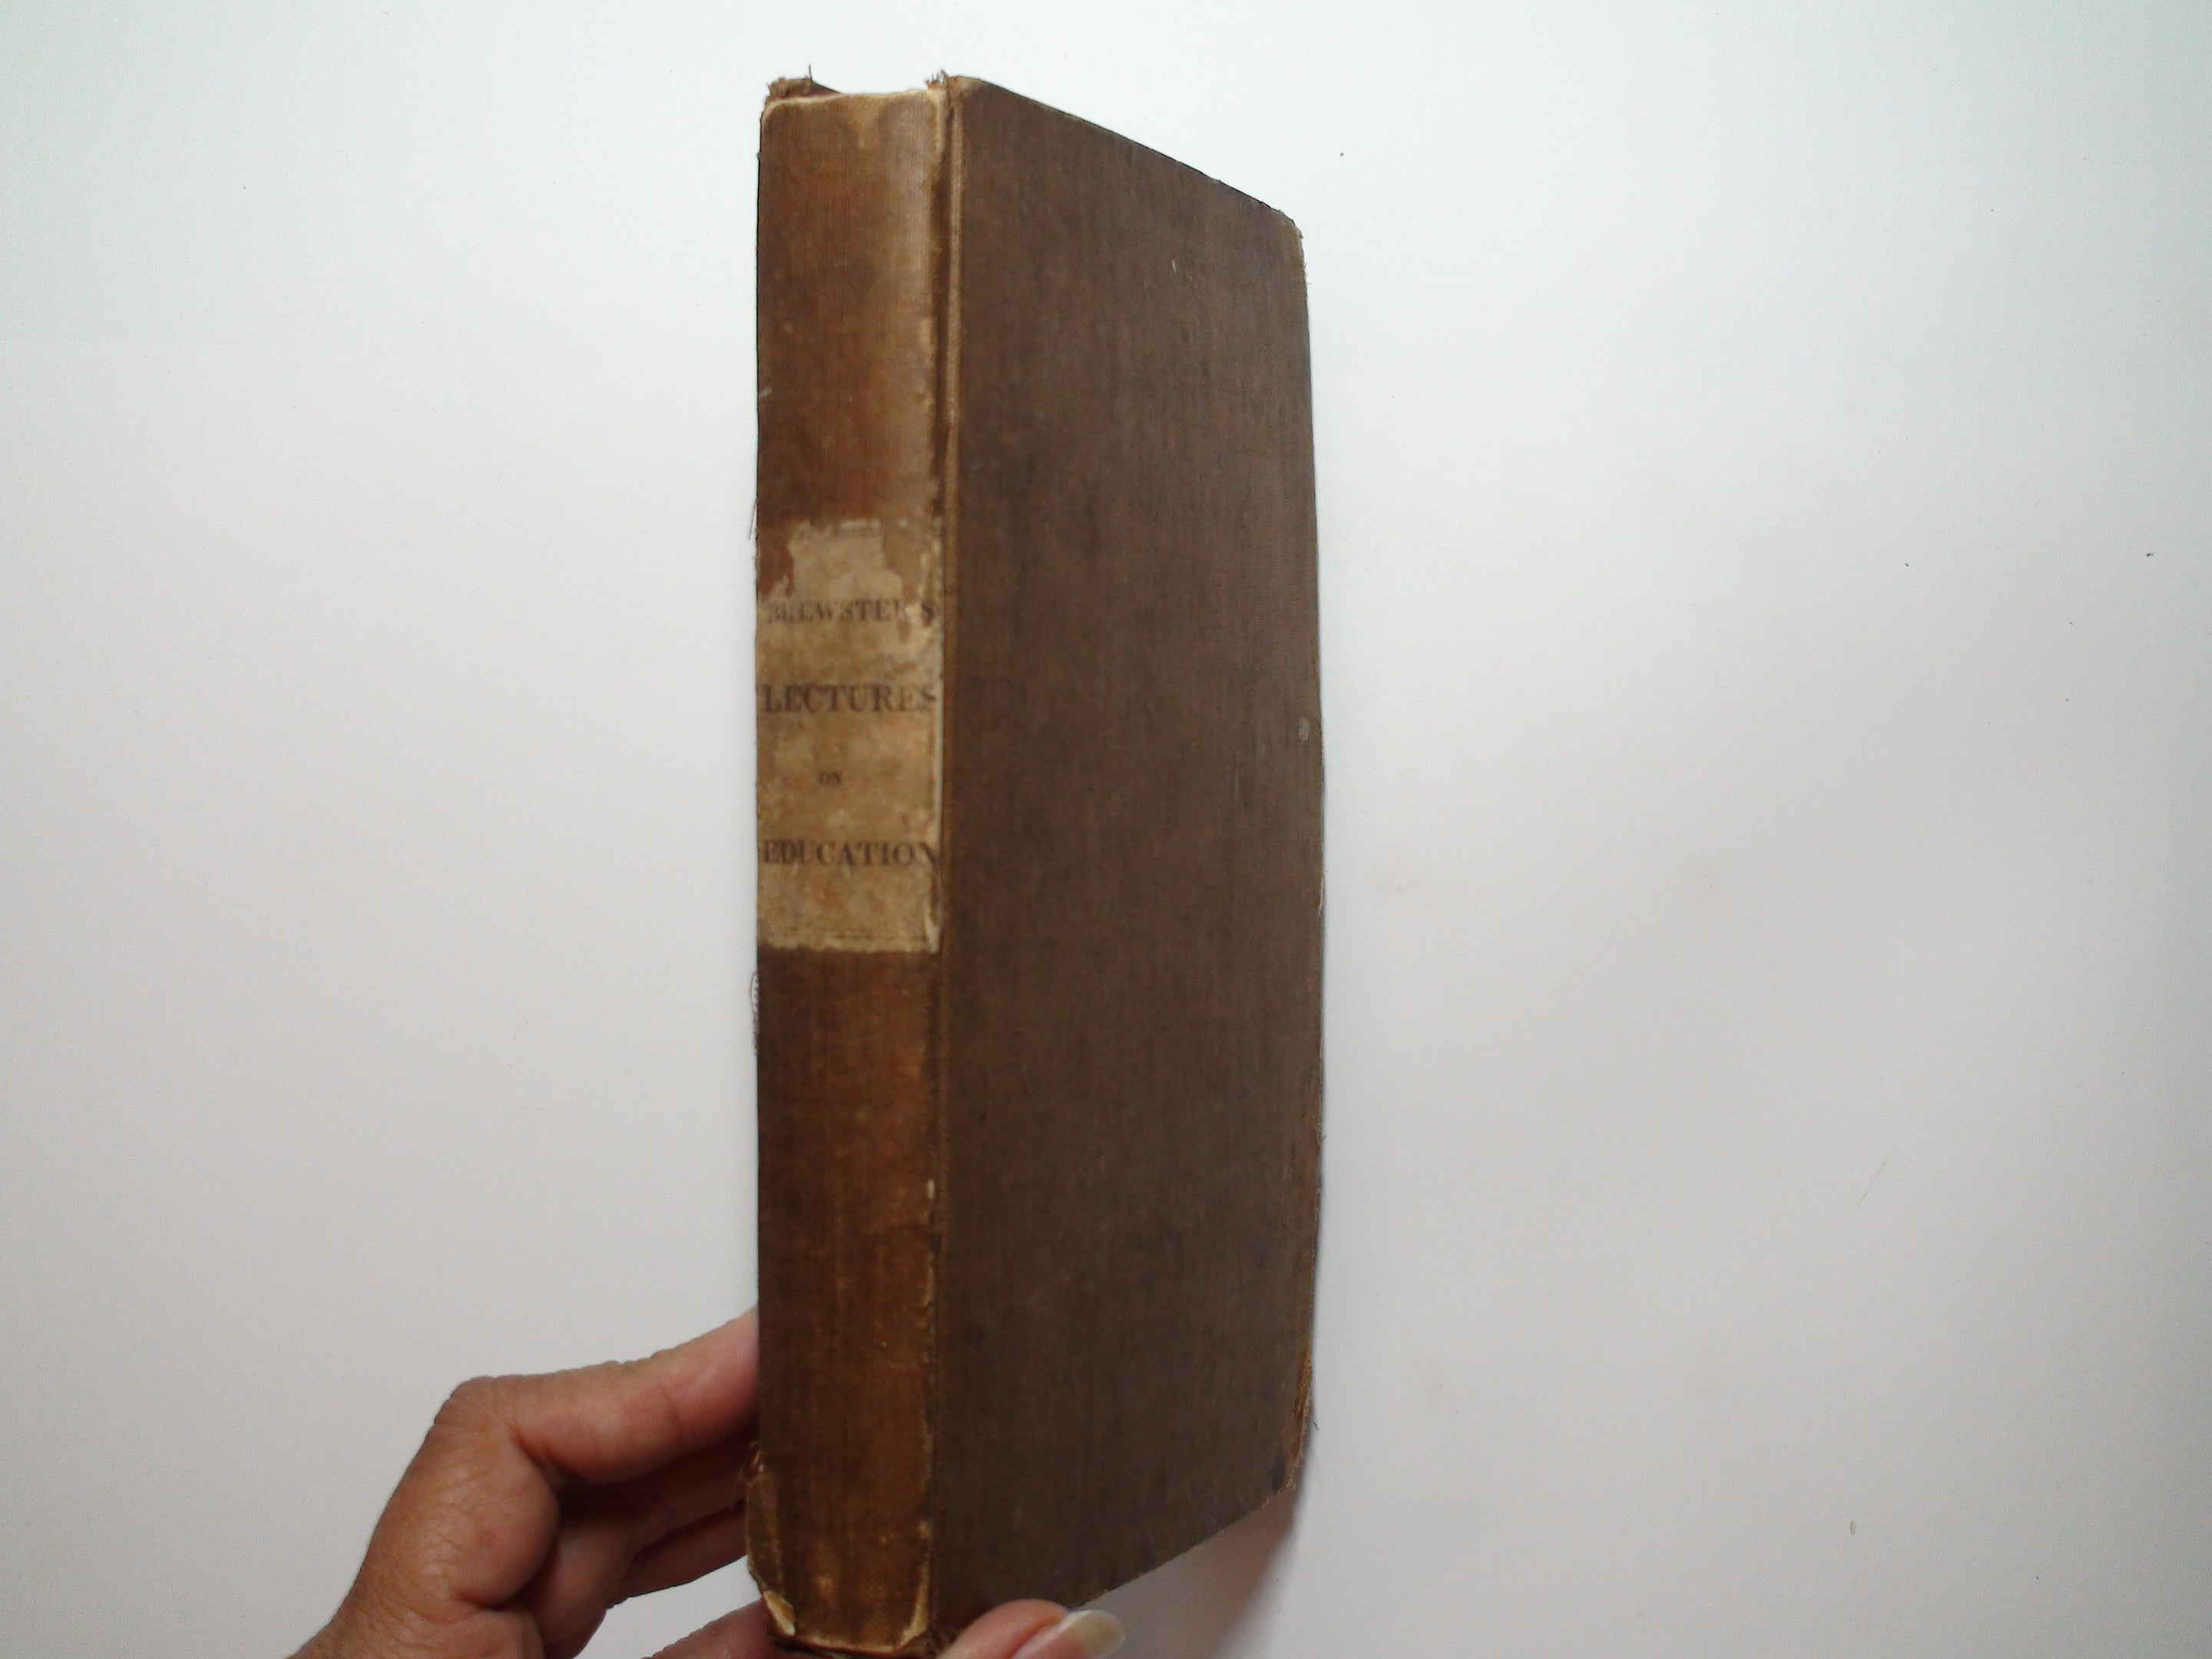 Lectures on Education, by George Brewster, Self Published, Rare, 1833